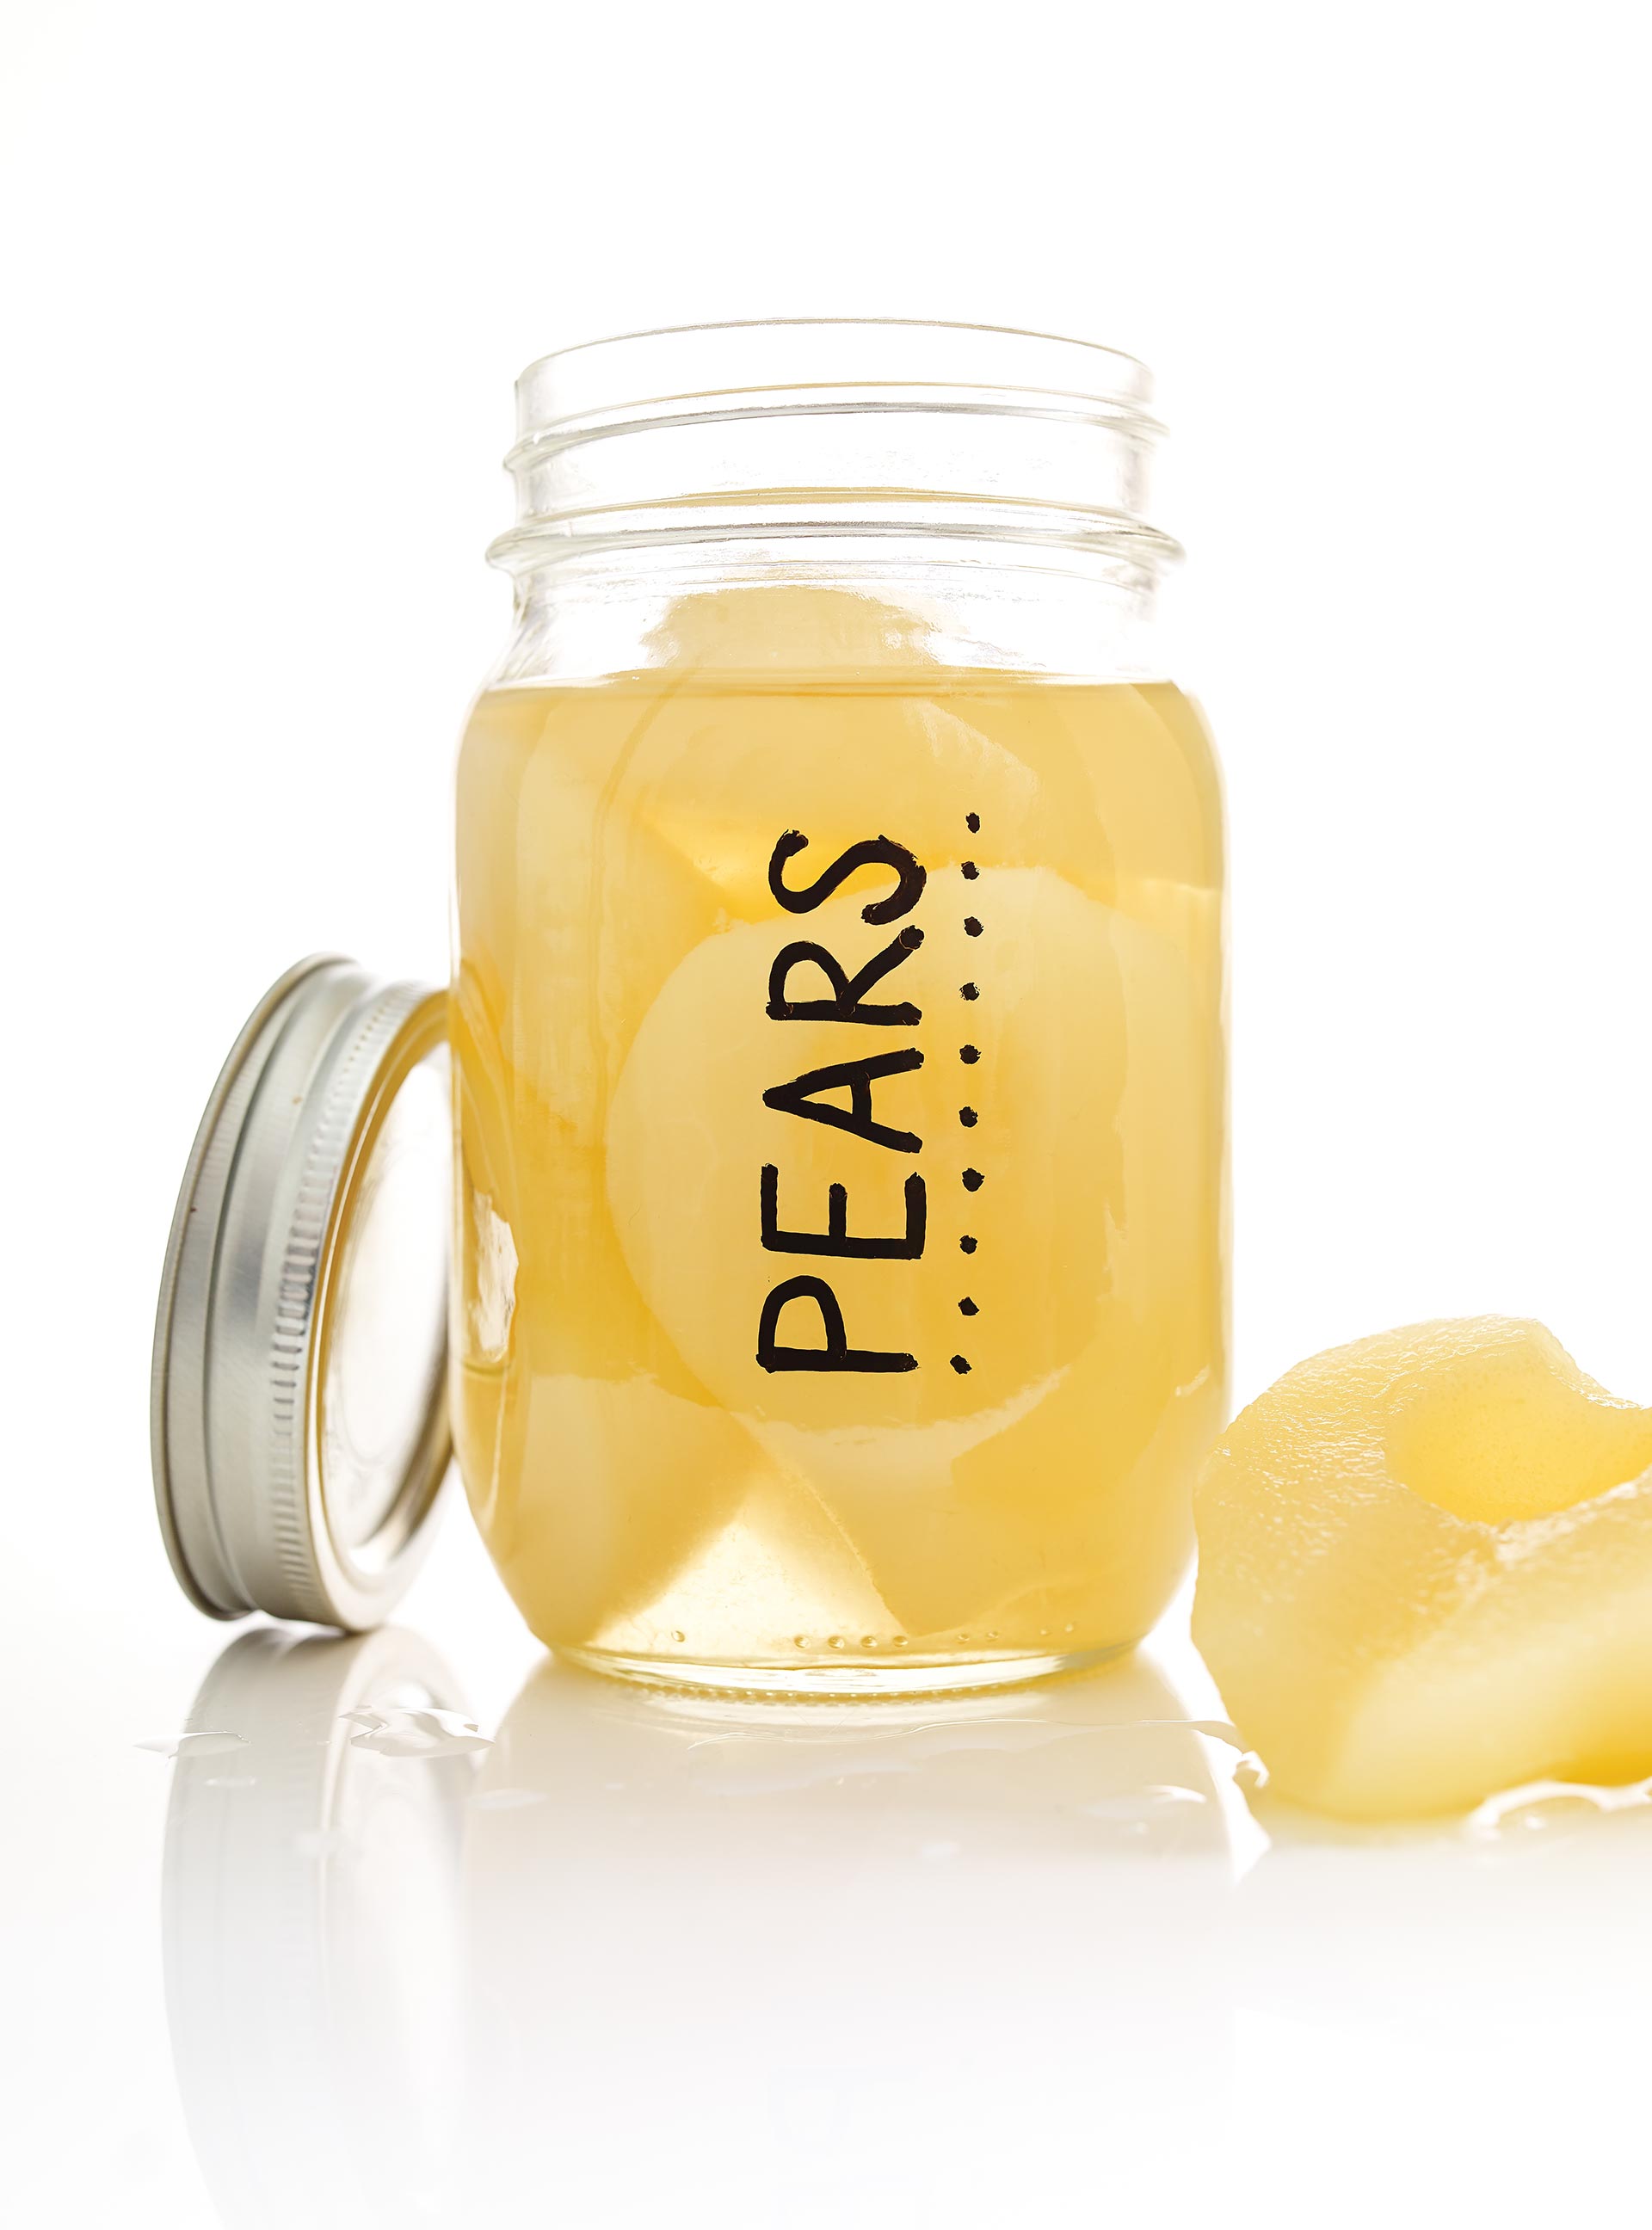 Pears in Syrup